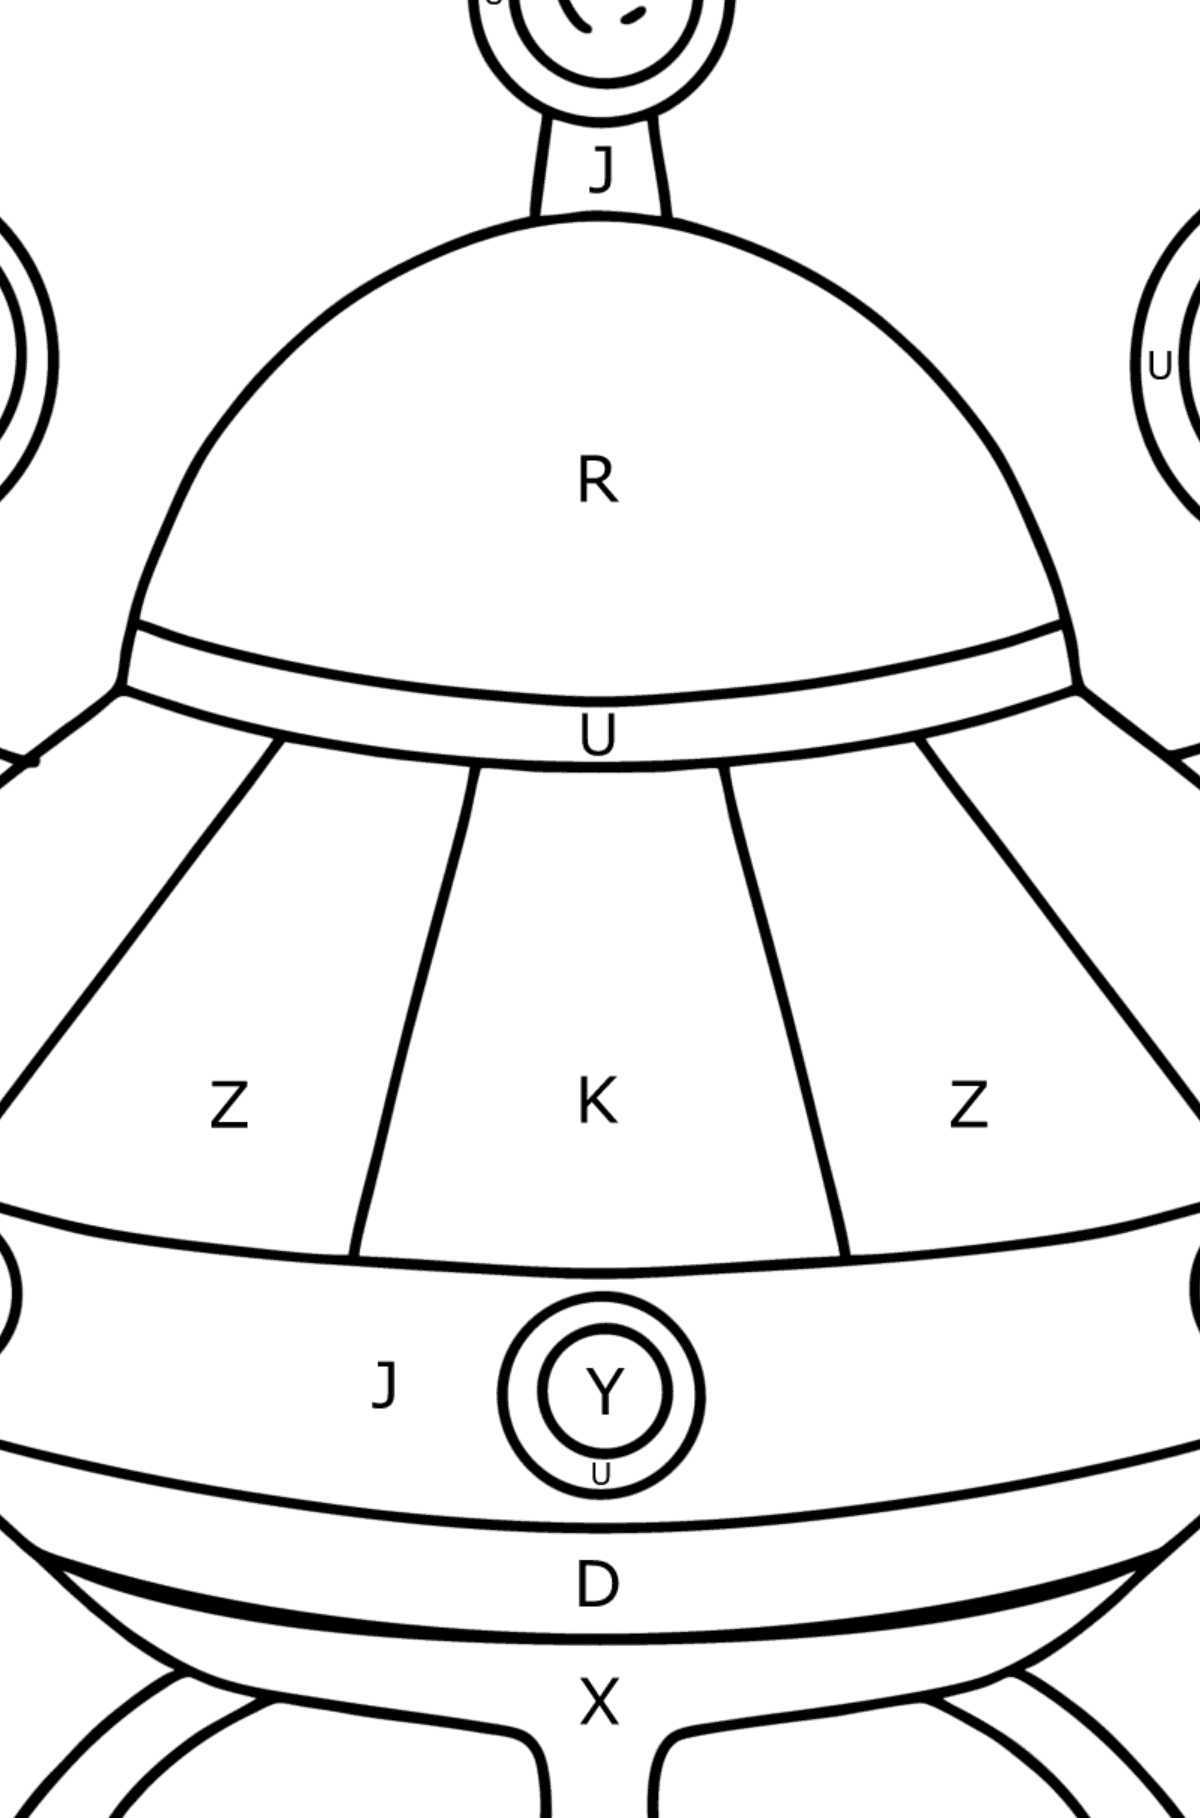 Alien spaceship coloring pages - Coloring by Letters for Kids